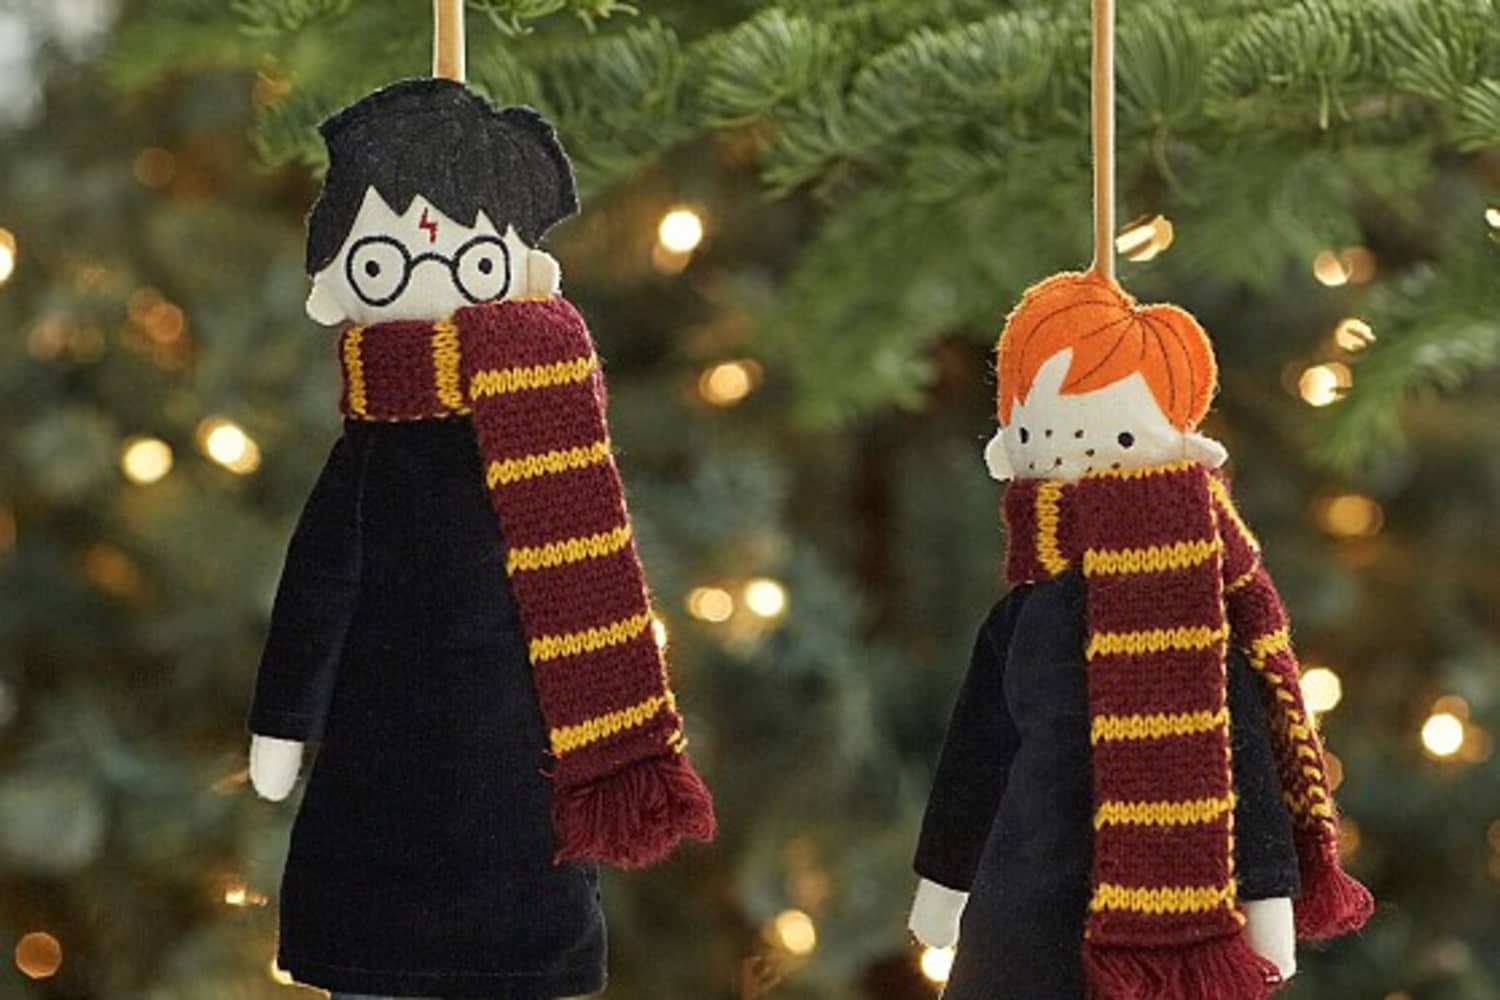 Hallmark Released These Adorable Harry Potter Ornaments for 2019